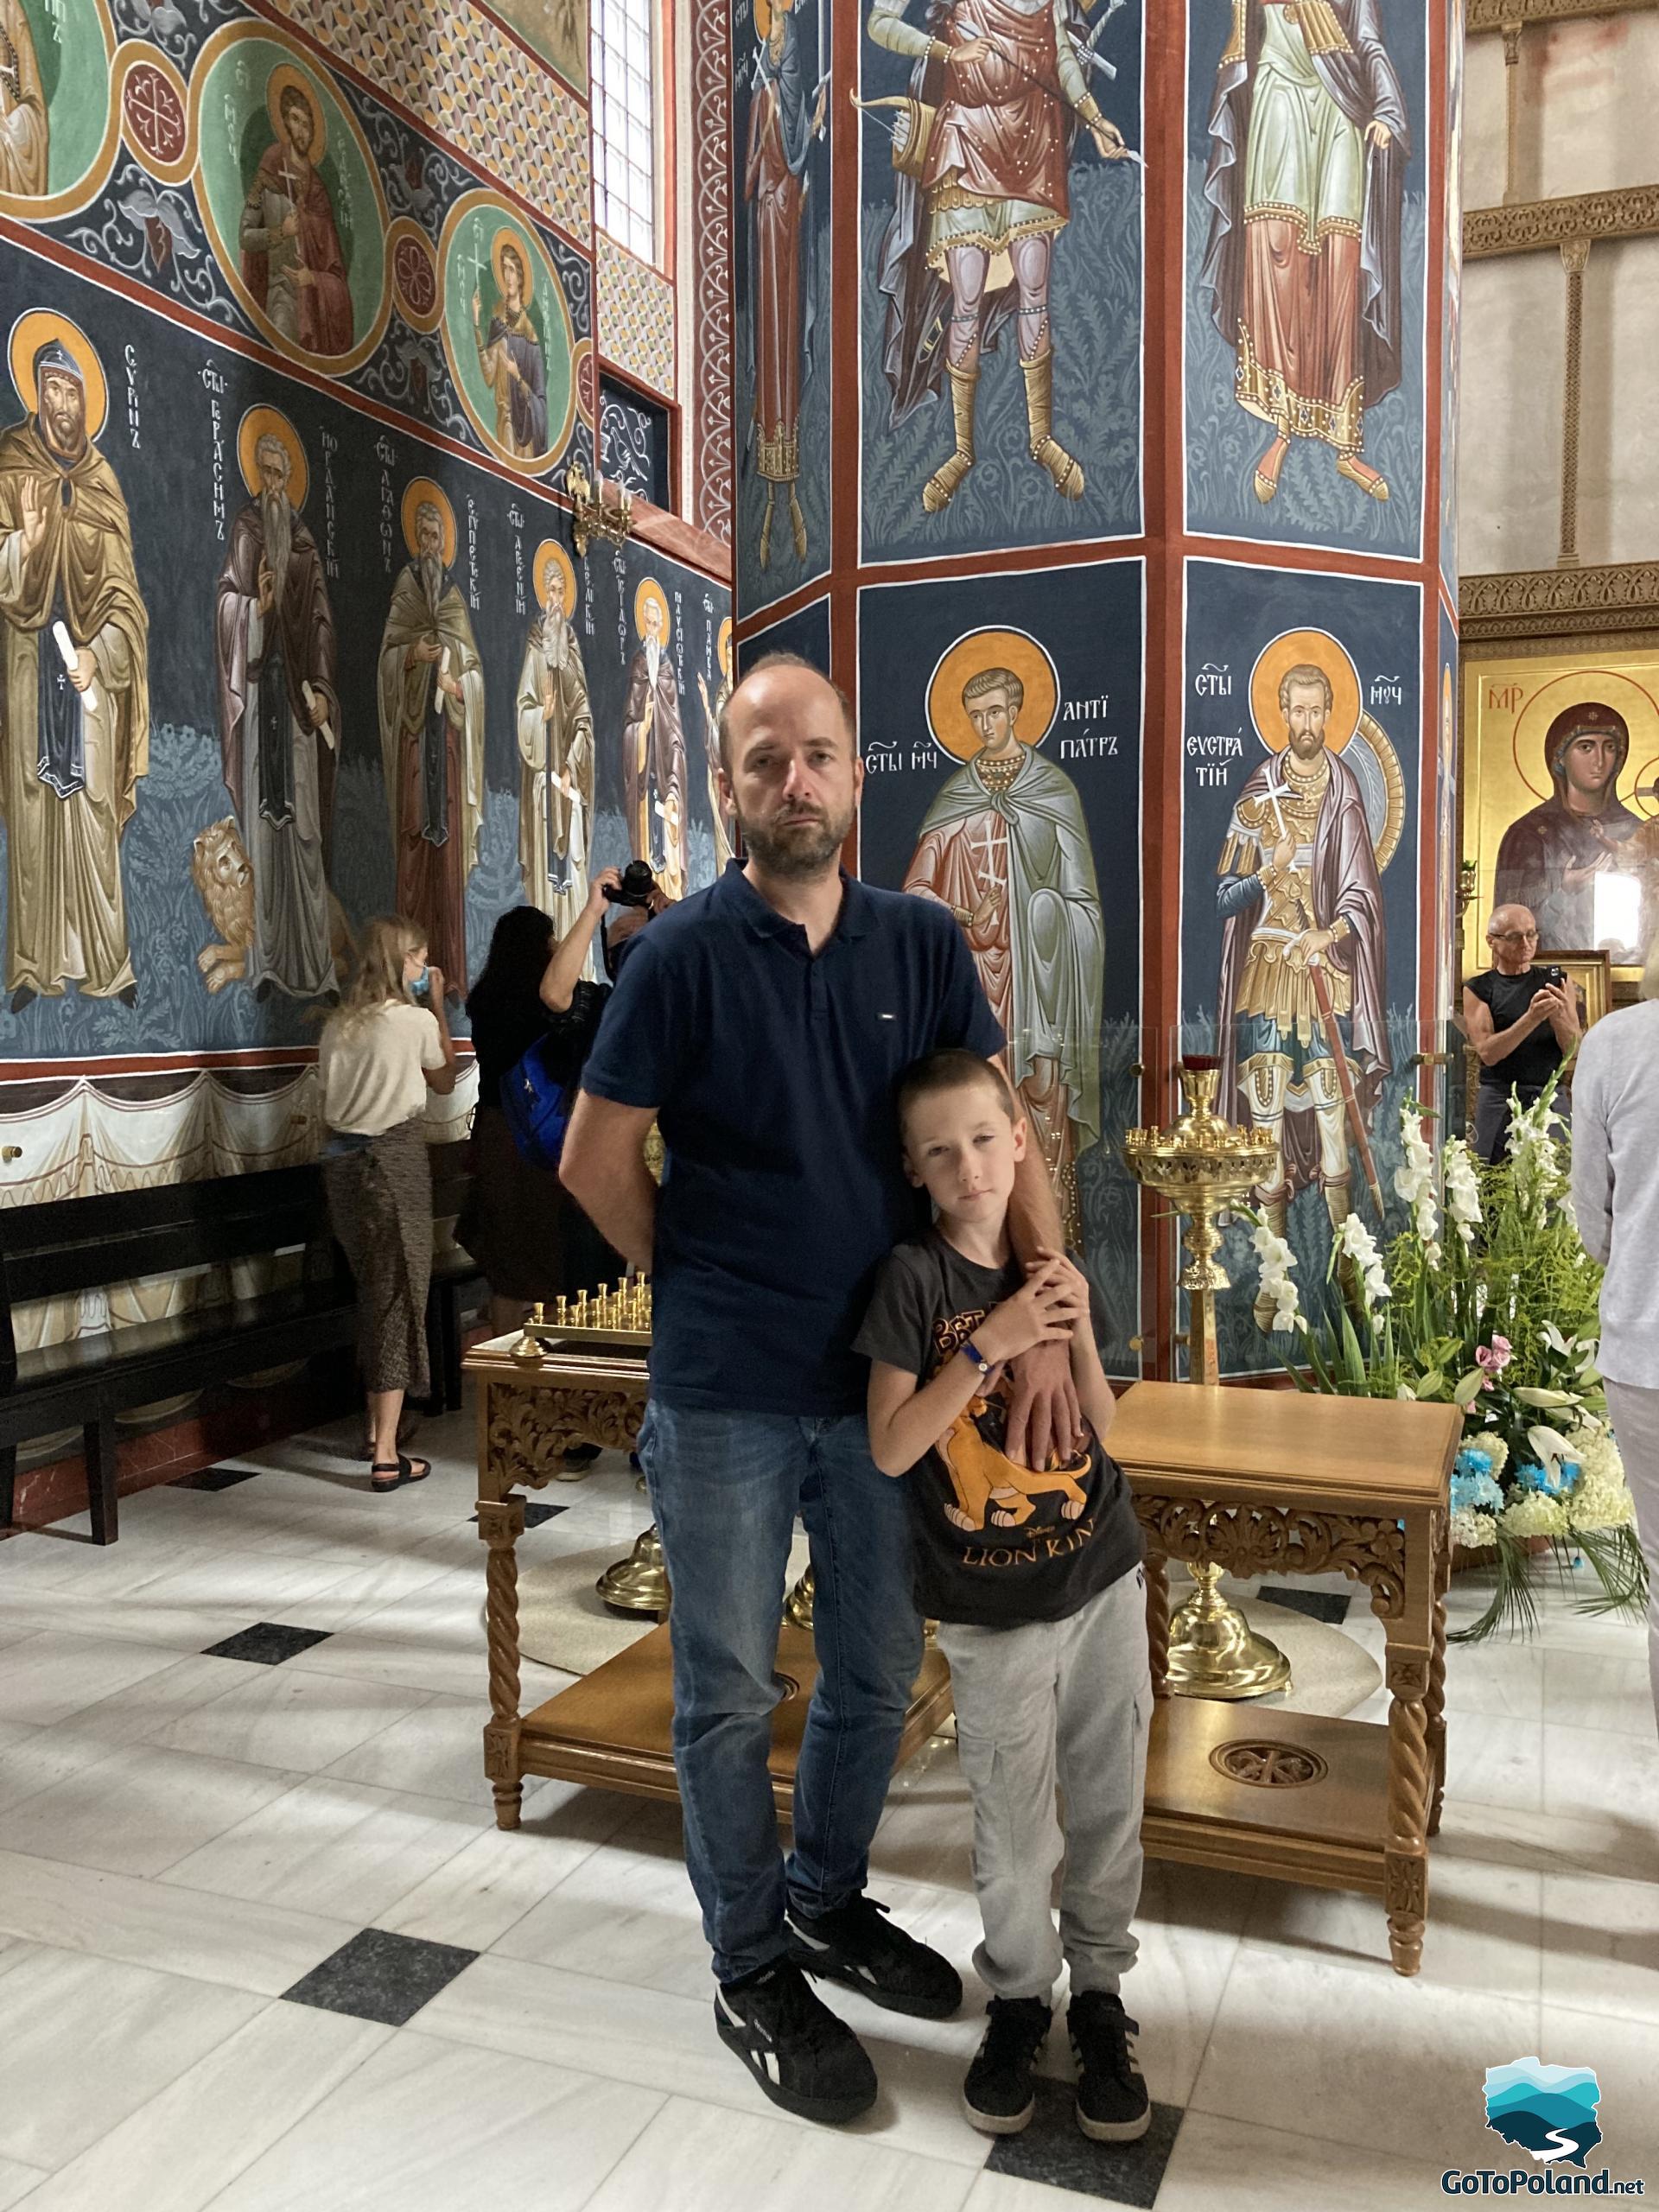 a man and a boy in the orthodox church highly decorated